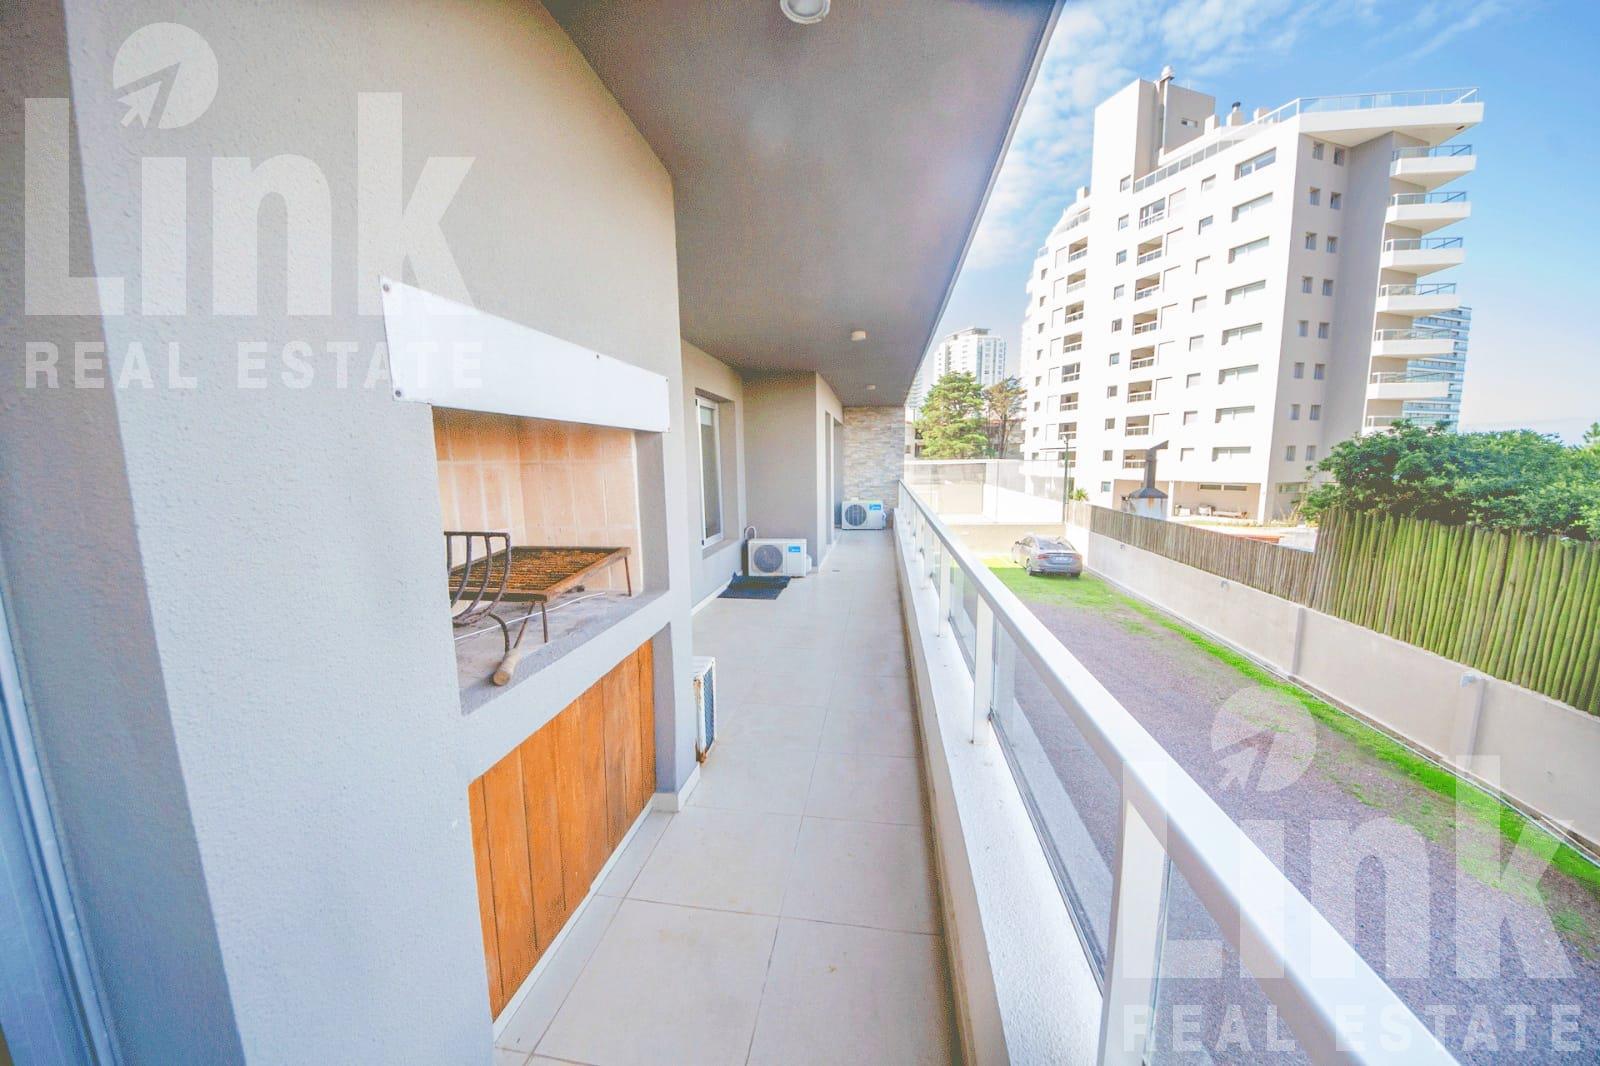 #5031313 | Venta | Departamento | Aidy Grill (Link Real State Boutique)